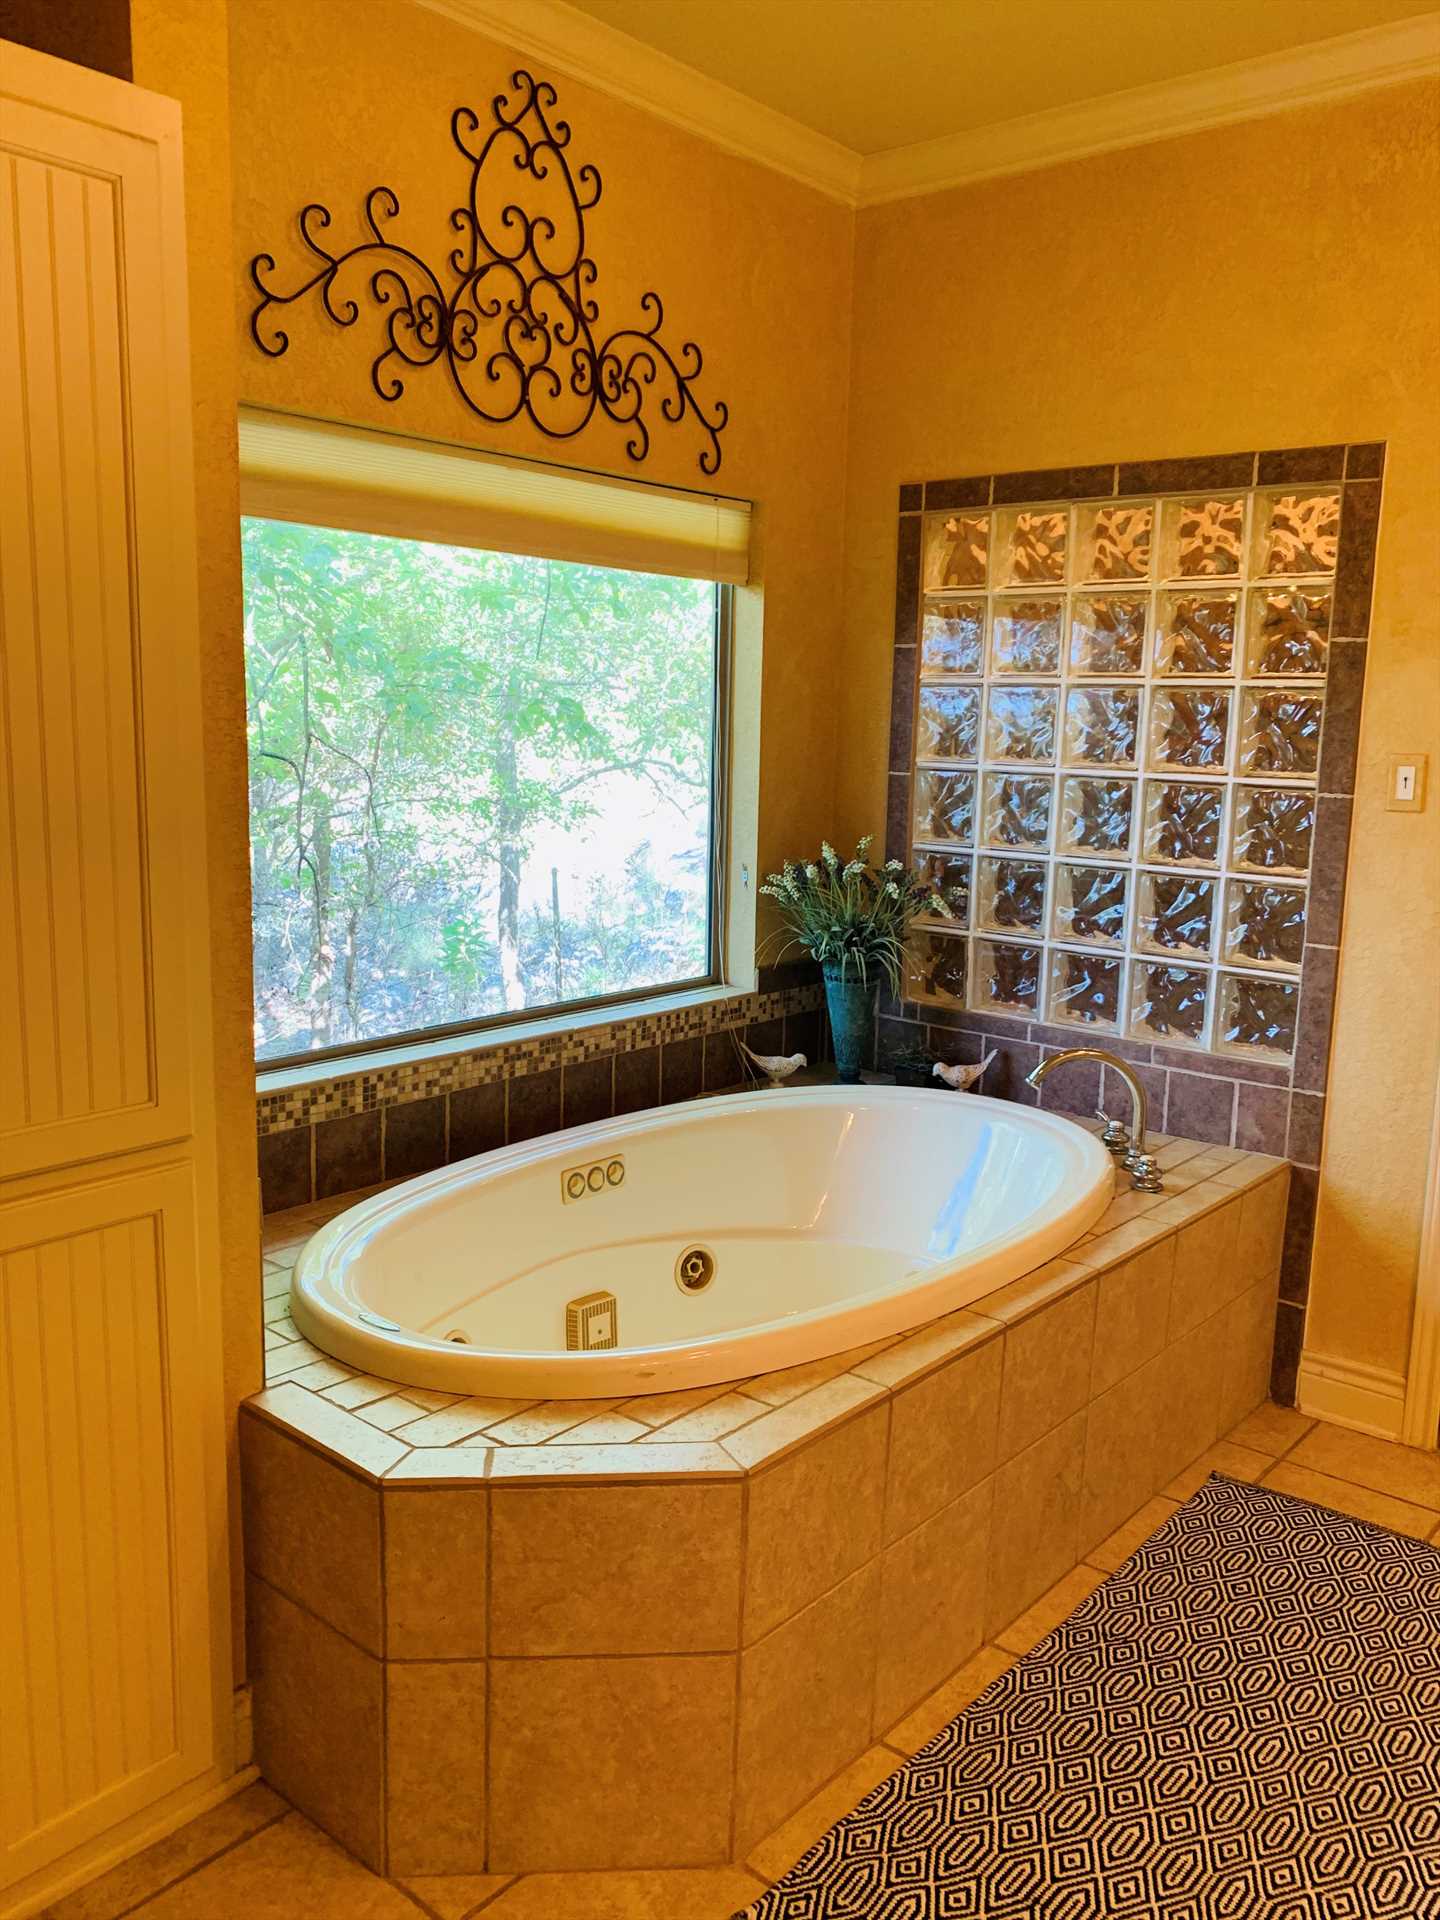                                                 The Retreat has two-and-a-half baths, but there may be some friendly competition for access to the master bath's jacuzzi-style tub!